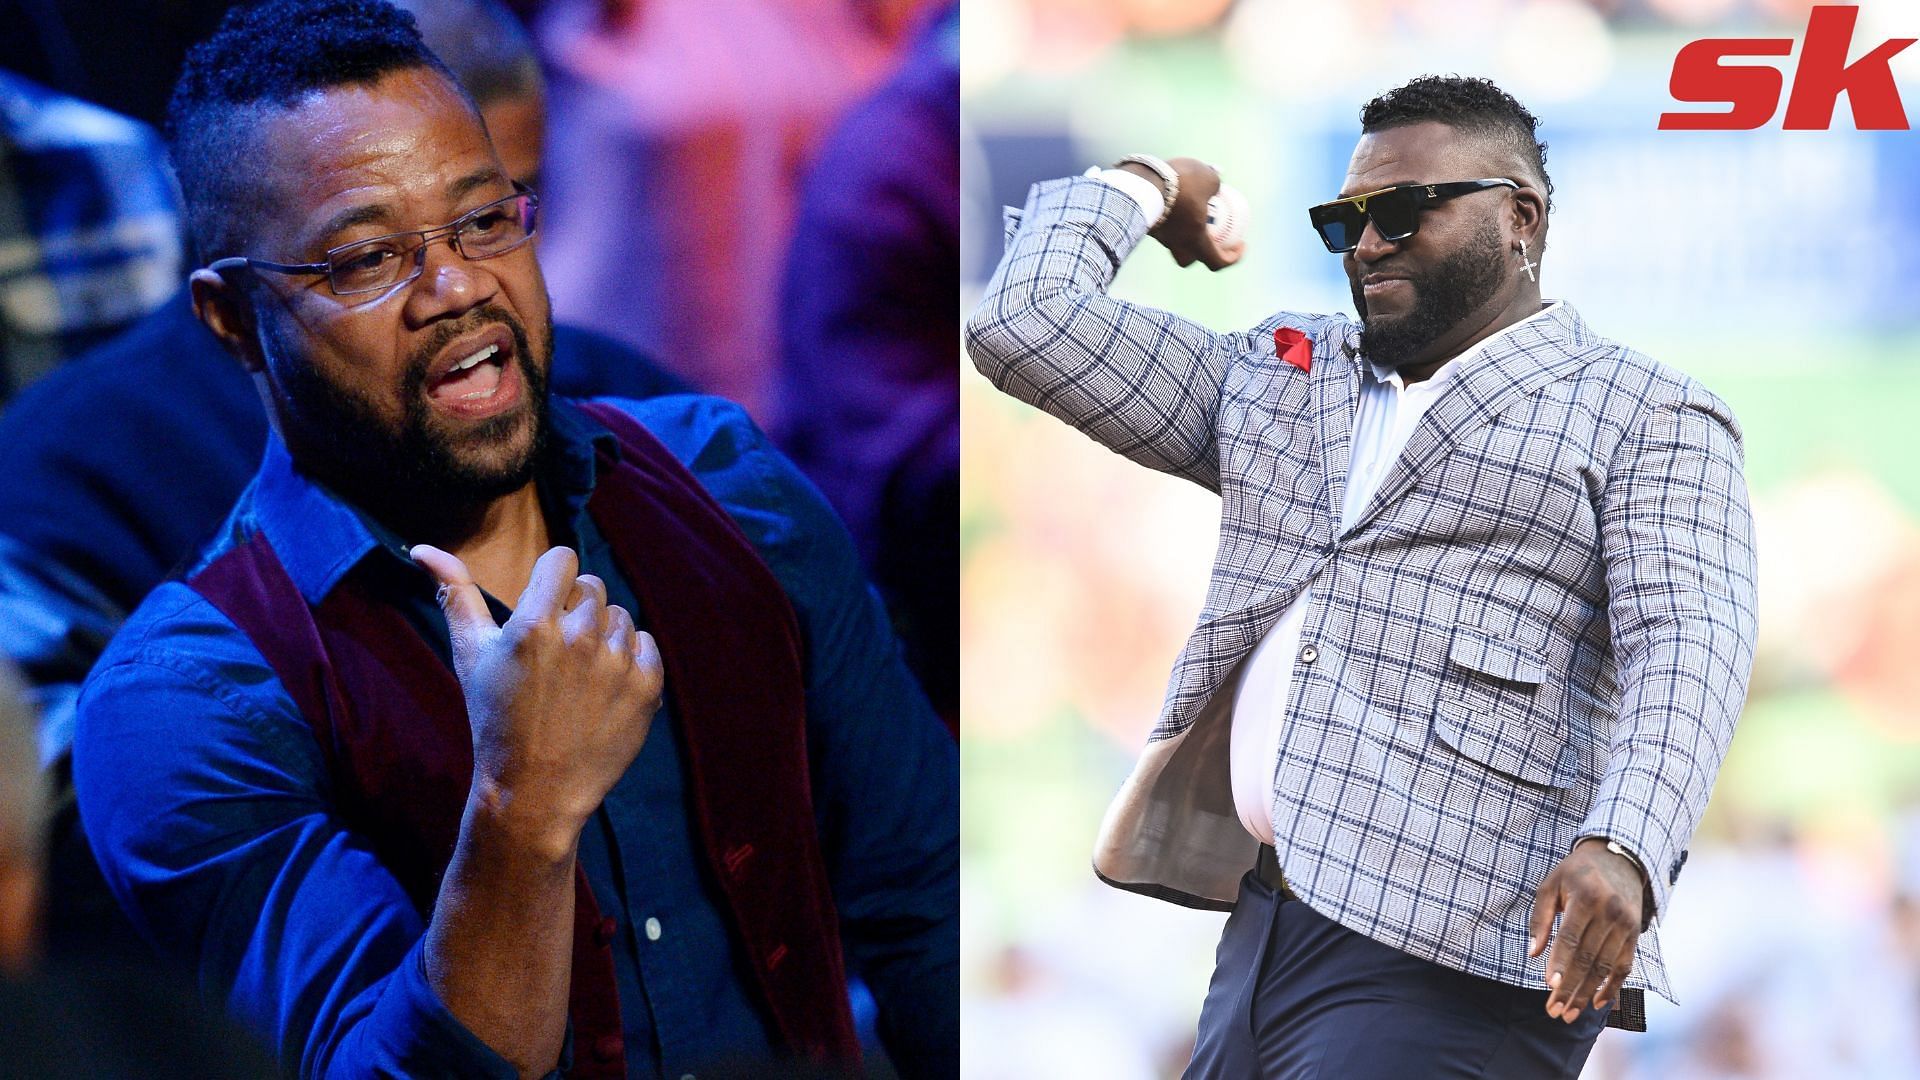 Cuba Gooding Jr. spoke in support of former Boston Red Sox player David Ortiz after his shooting in 2019